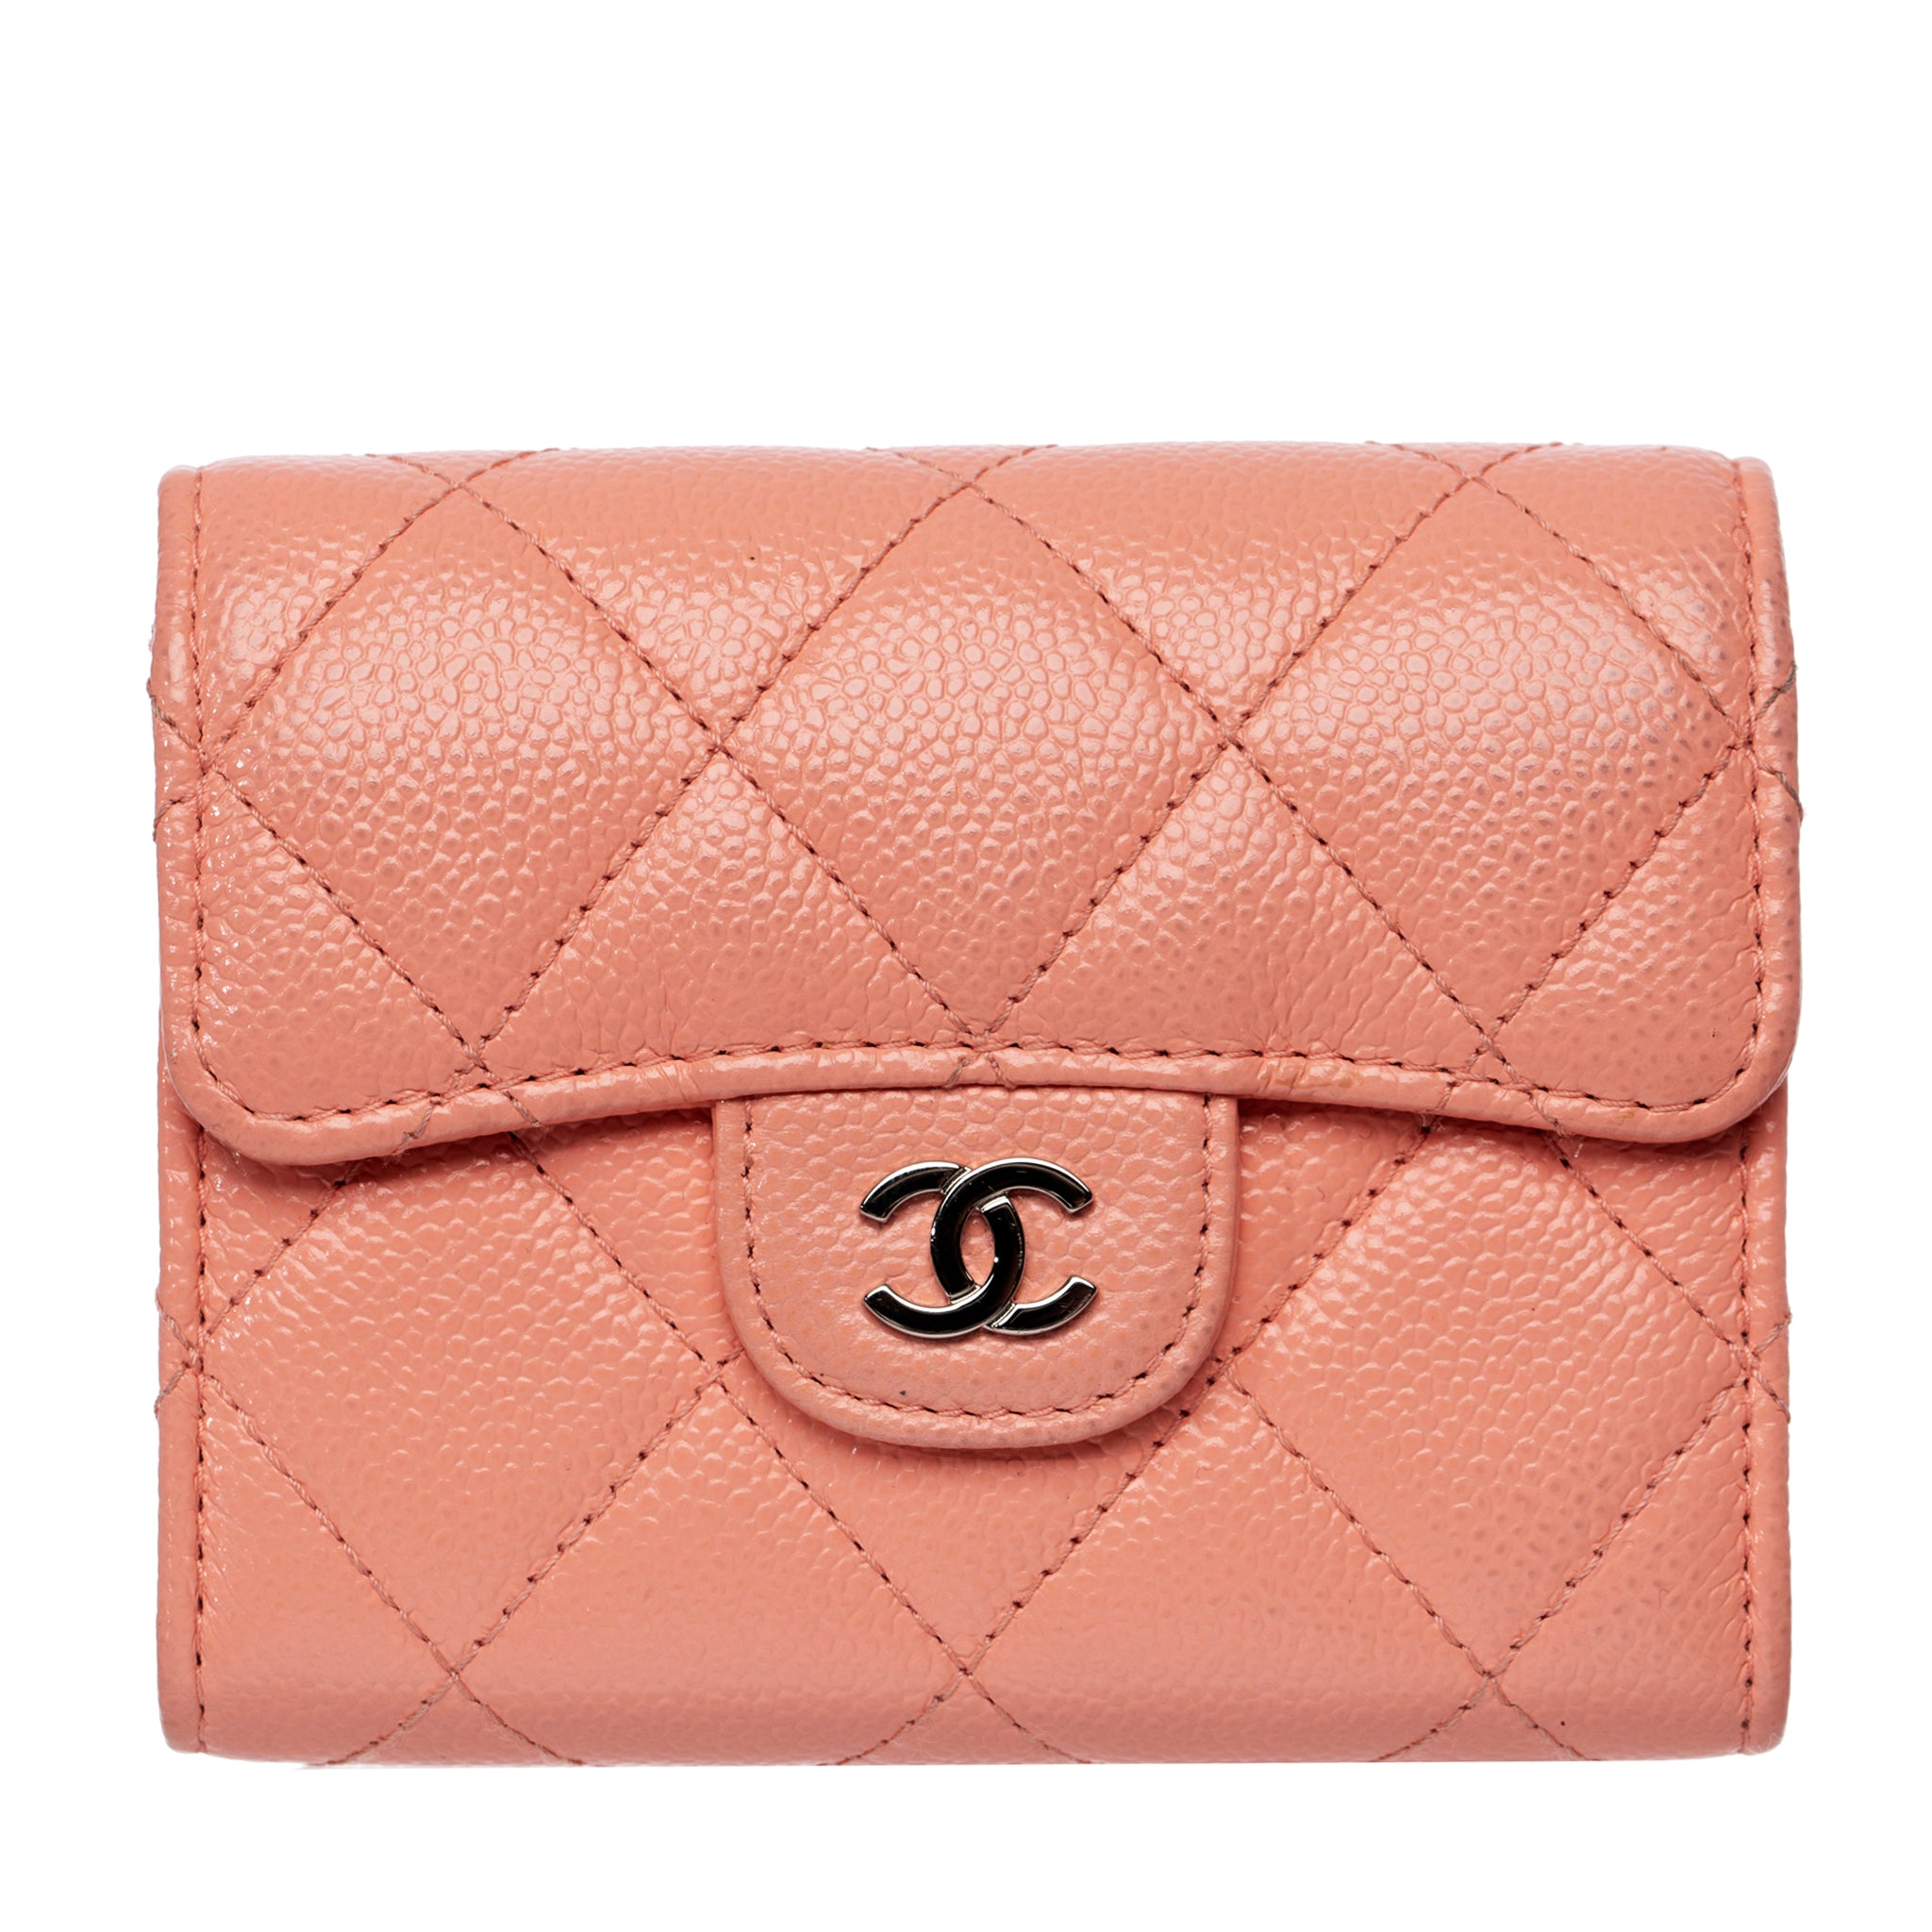 Chanel Small Wallet-On-Chain Pink Caviar Leather